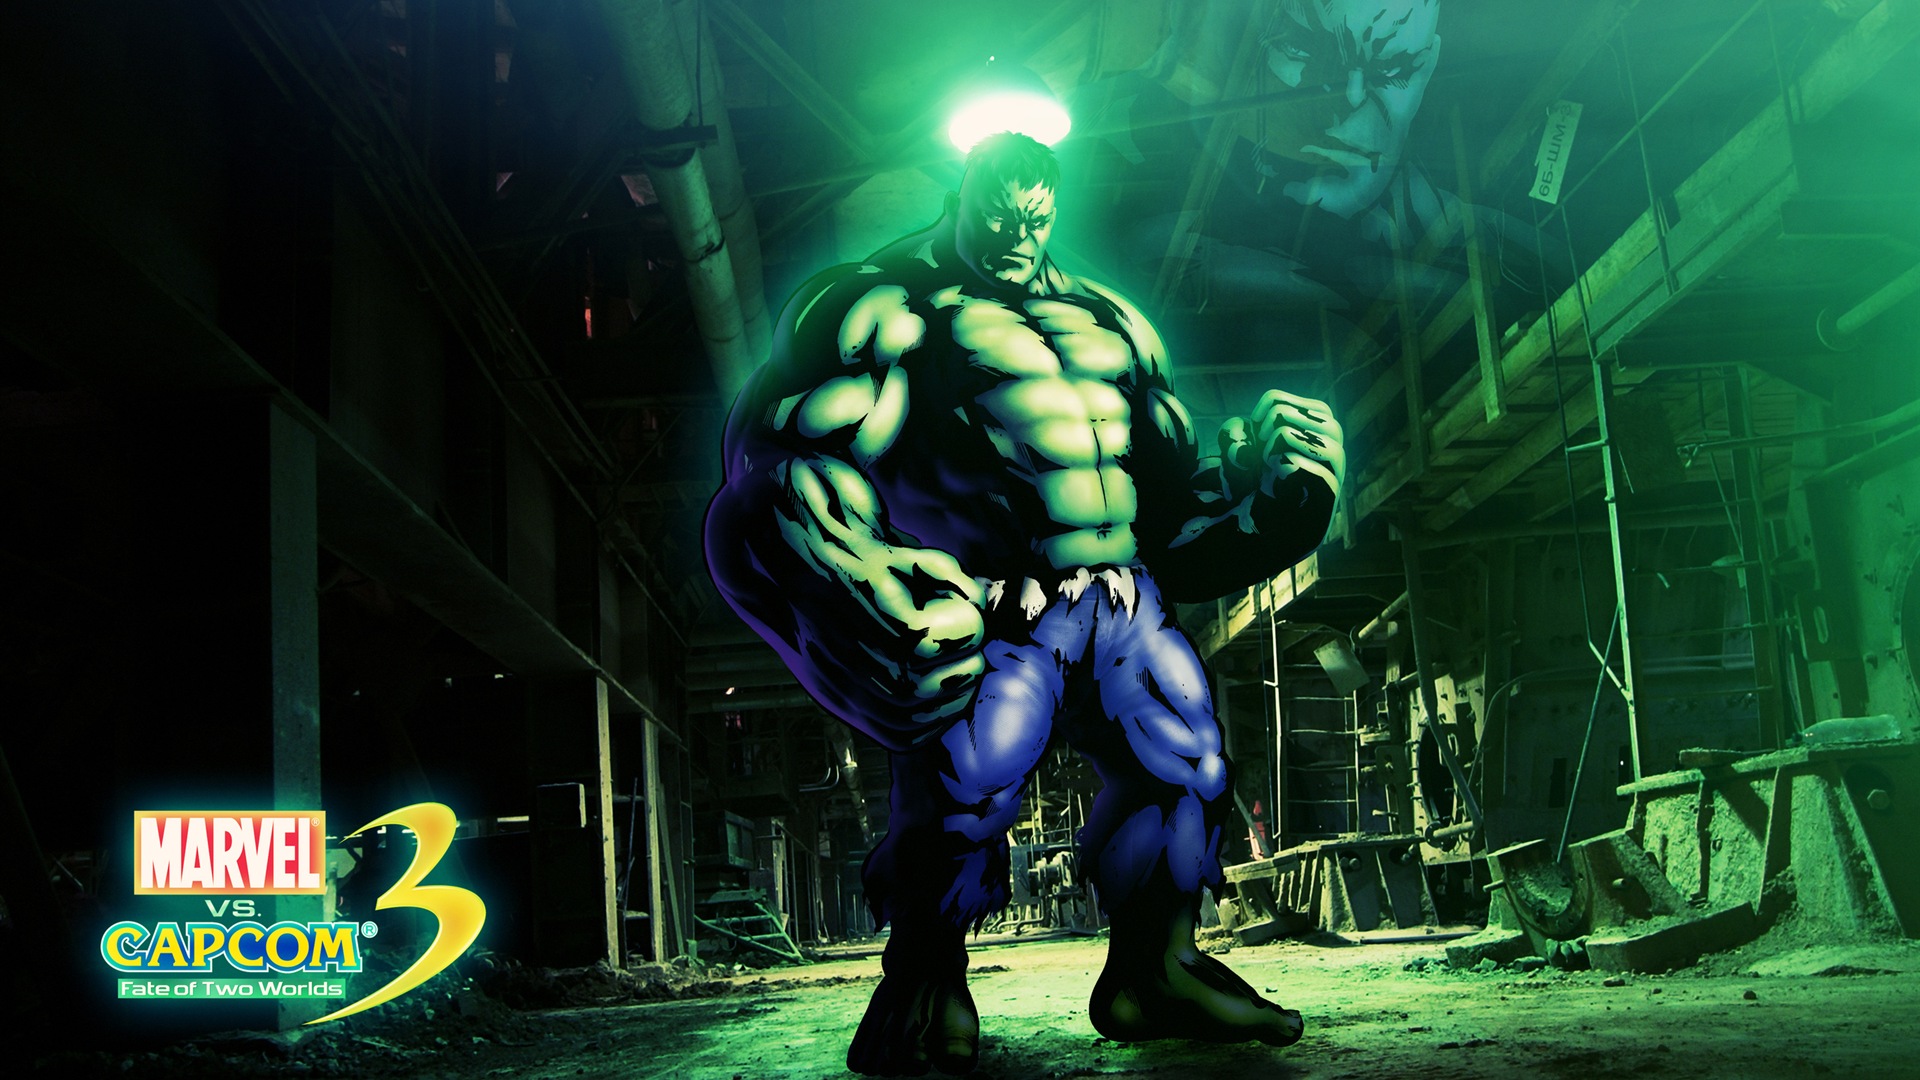 Marvel VS. Capcom 3: Fate of Two Worlds HD game wallpapers #11 - 1920x1080